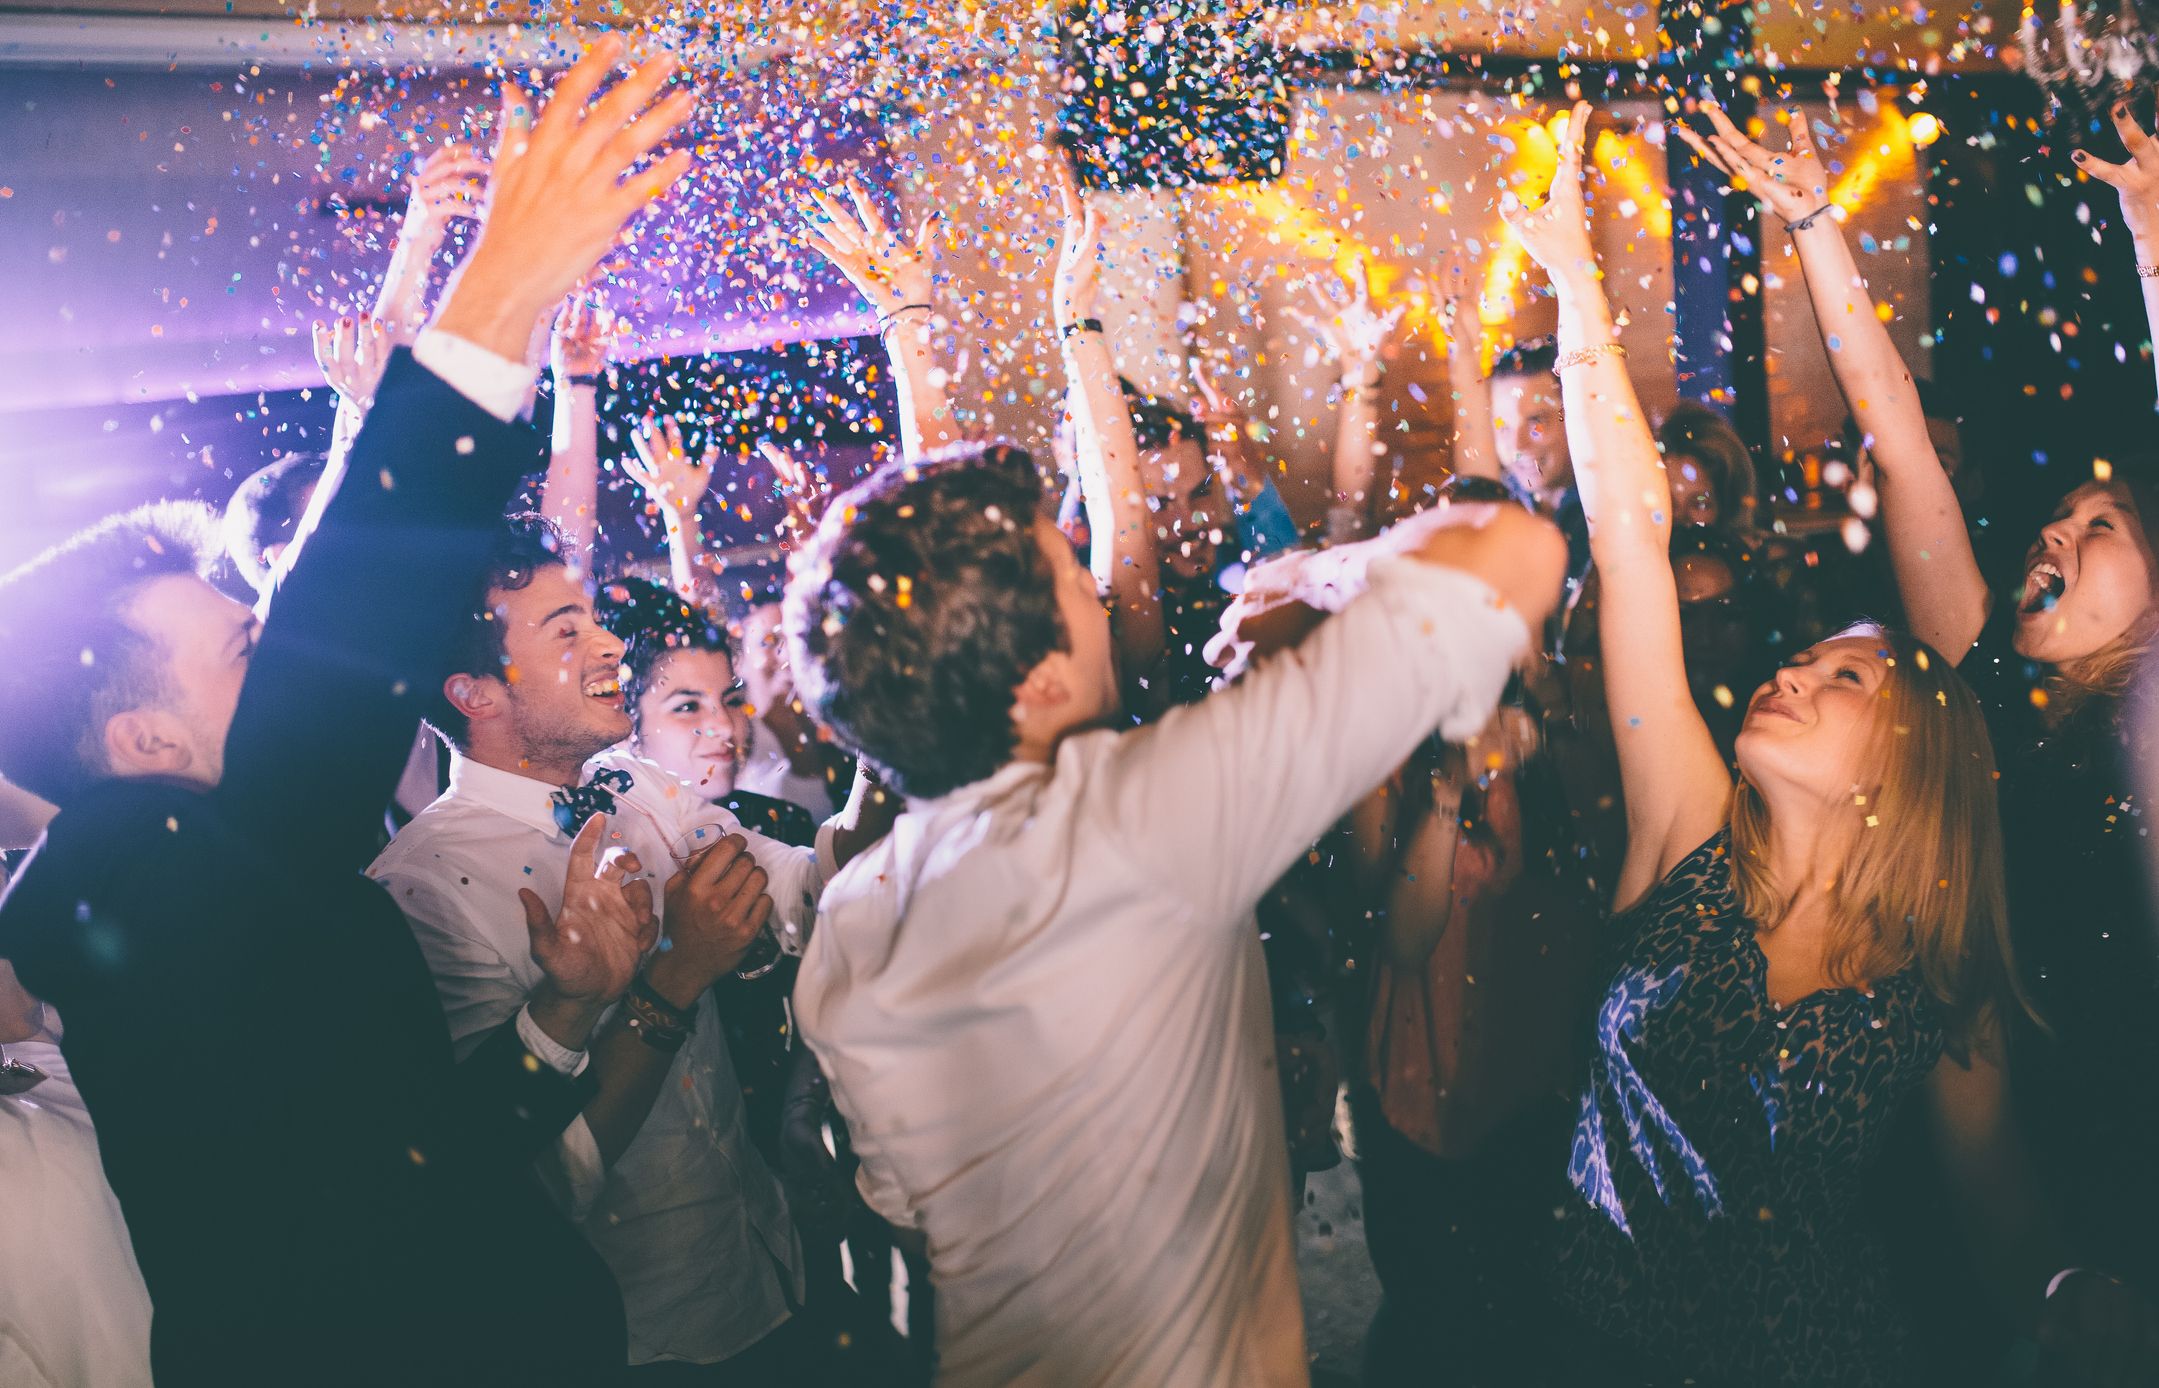 group of hipsters throwing confetti at a party in royalty free image 469322890 1544723219 - Chloe and Daniel's House Music-Inspired Wedding